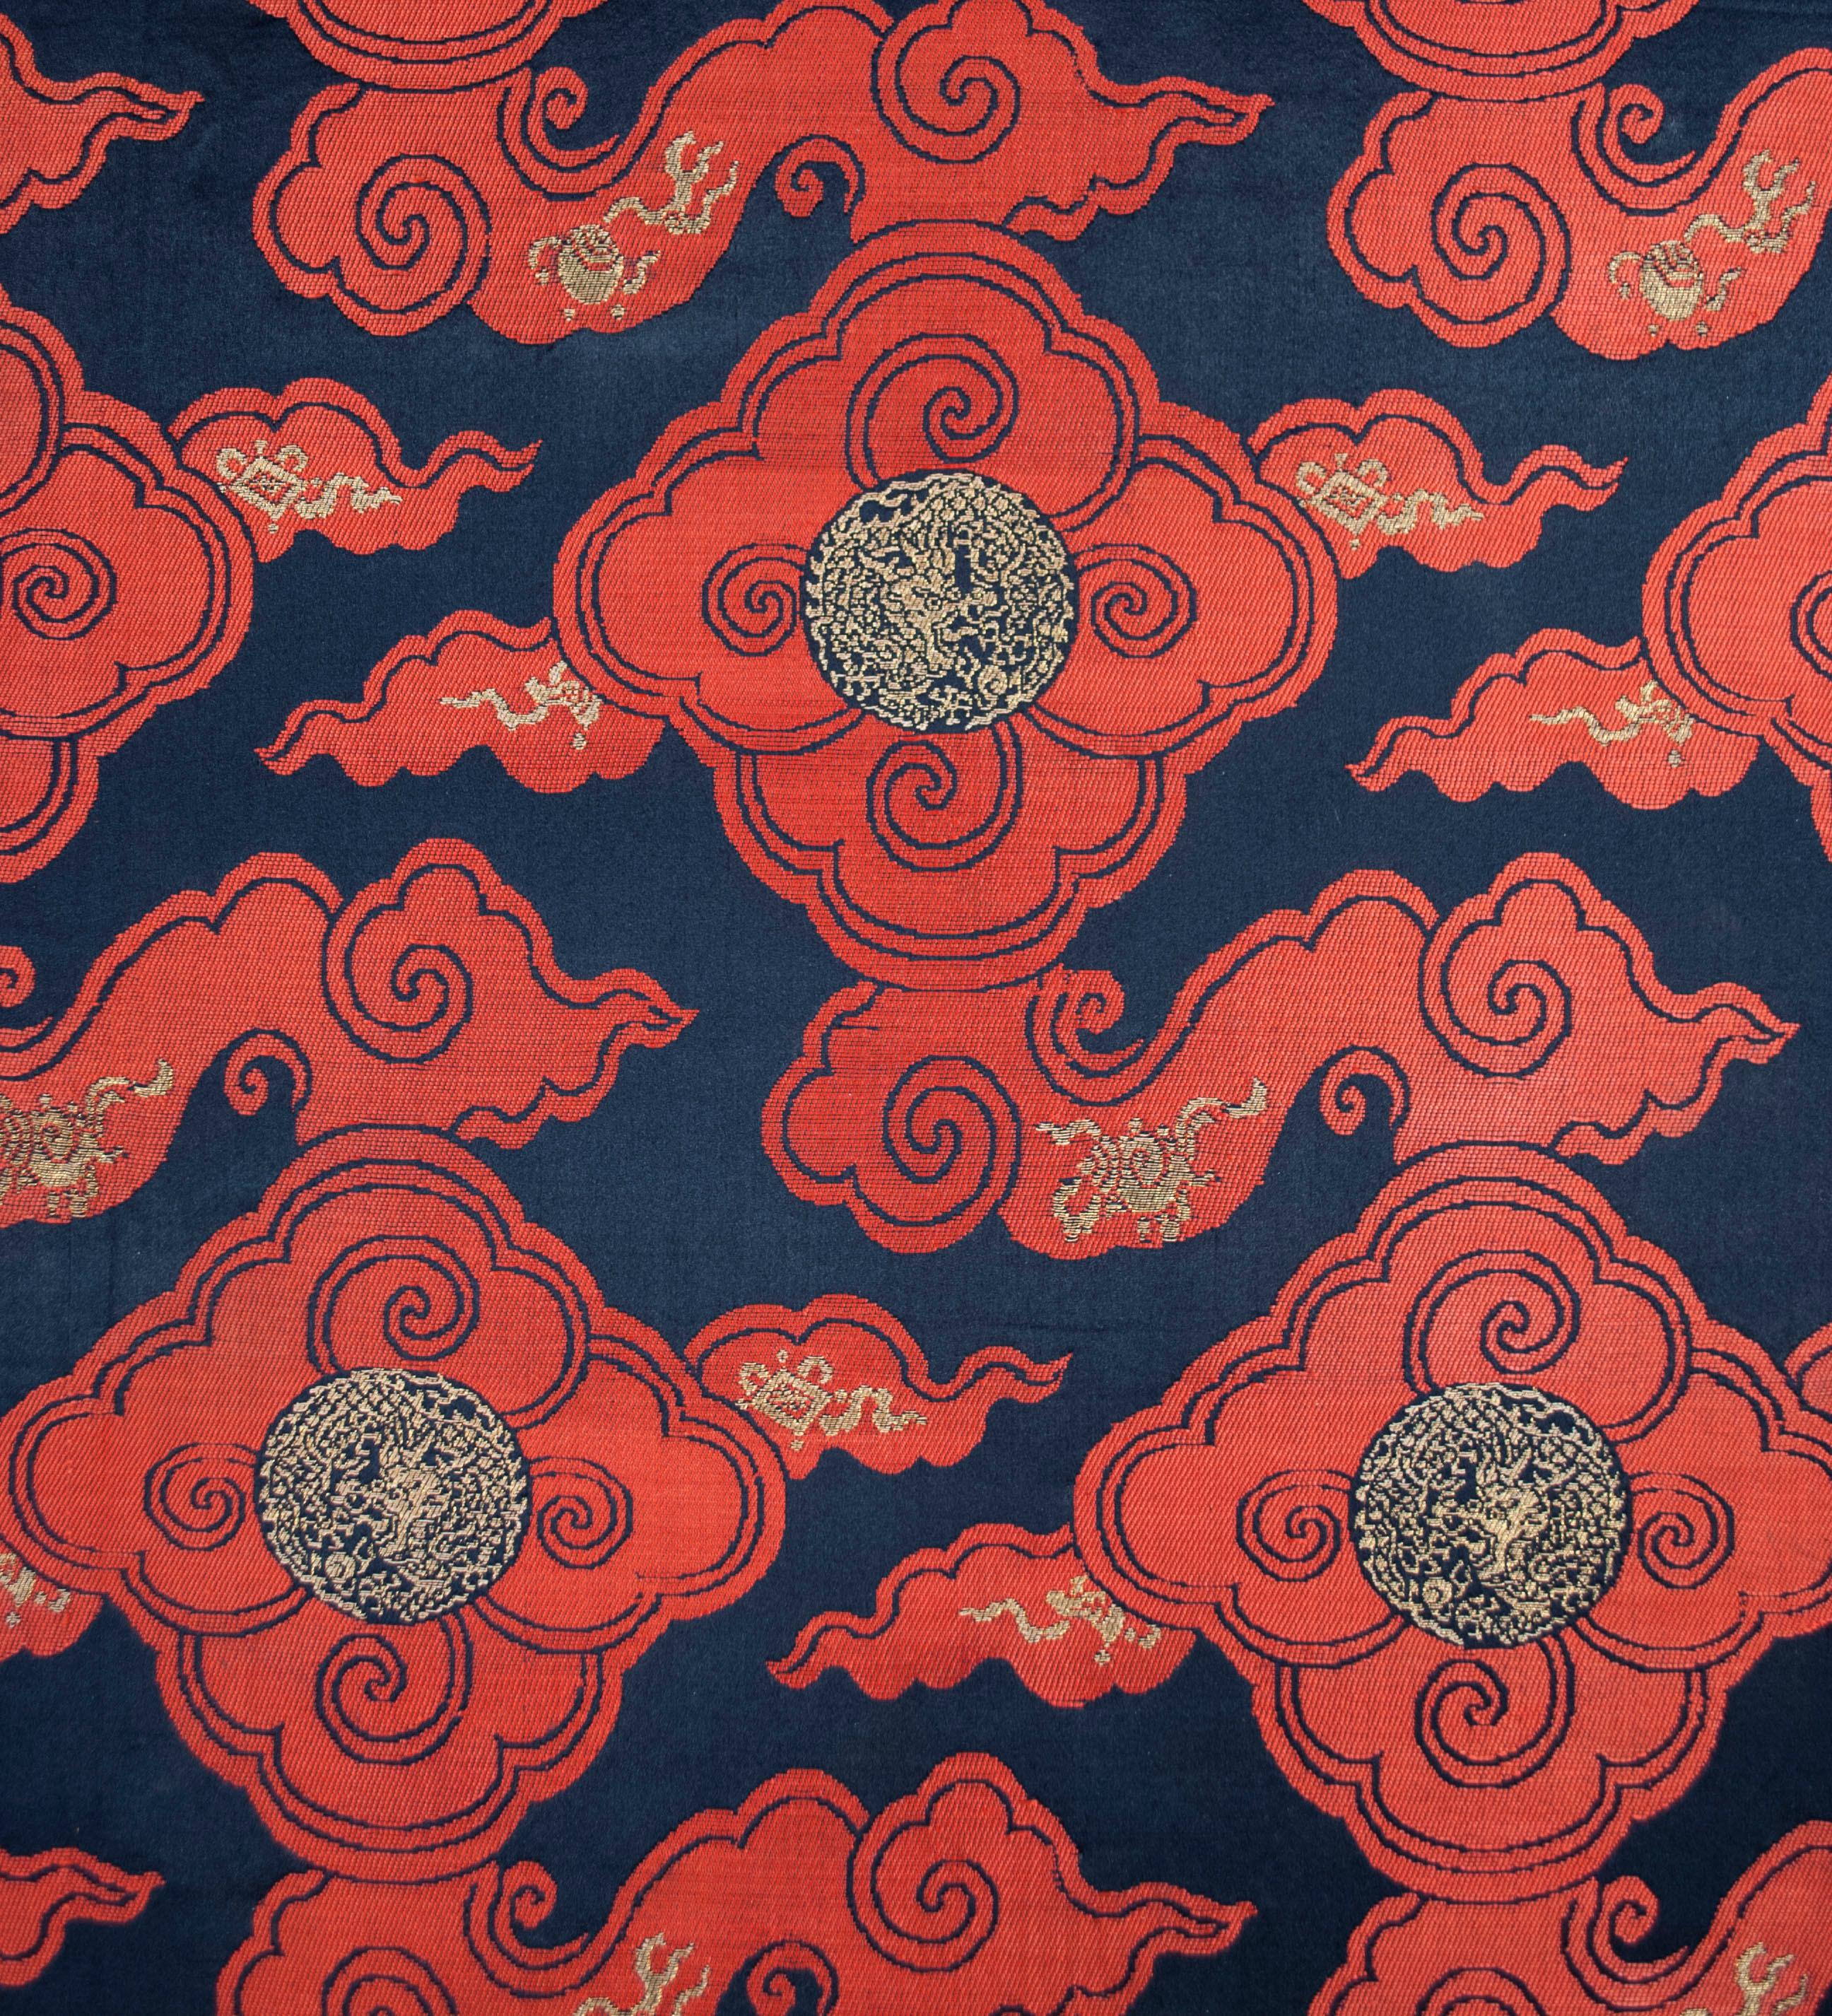 Chinese silk cloud-band textile with dragon roundels, circa 1800-1825.

A graphically compelling Qing period silk with a pattern of red cloud-bands (silk twill weave) floating across a dark blue field (silk satin), with roundels of facing dragons